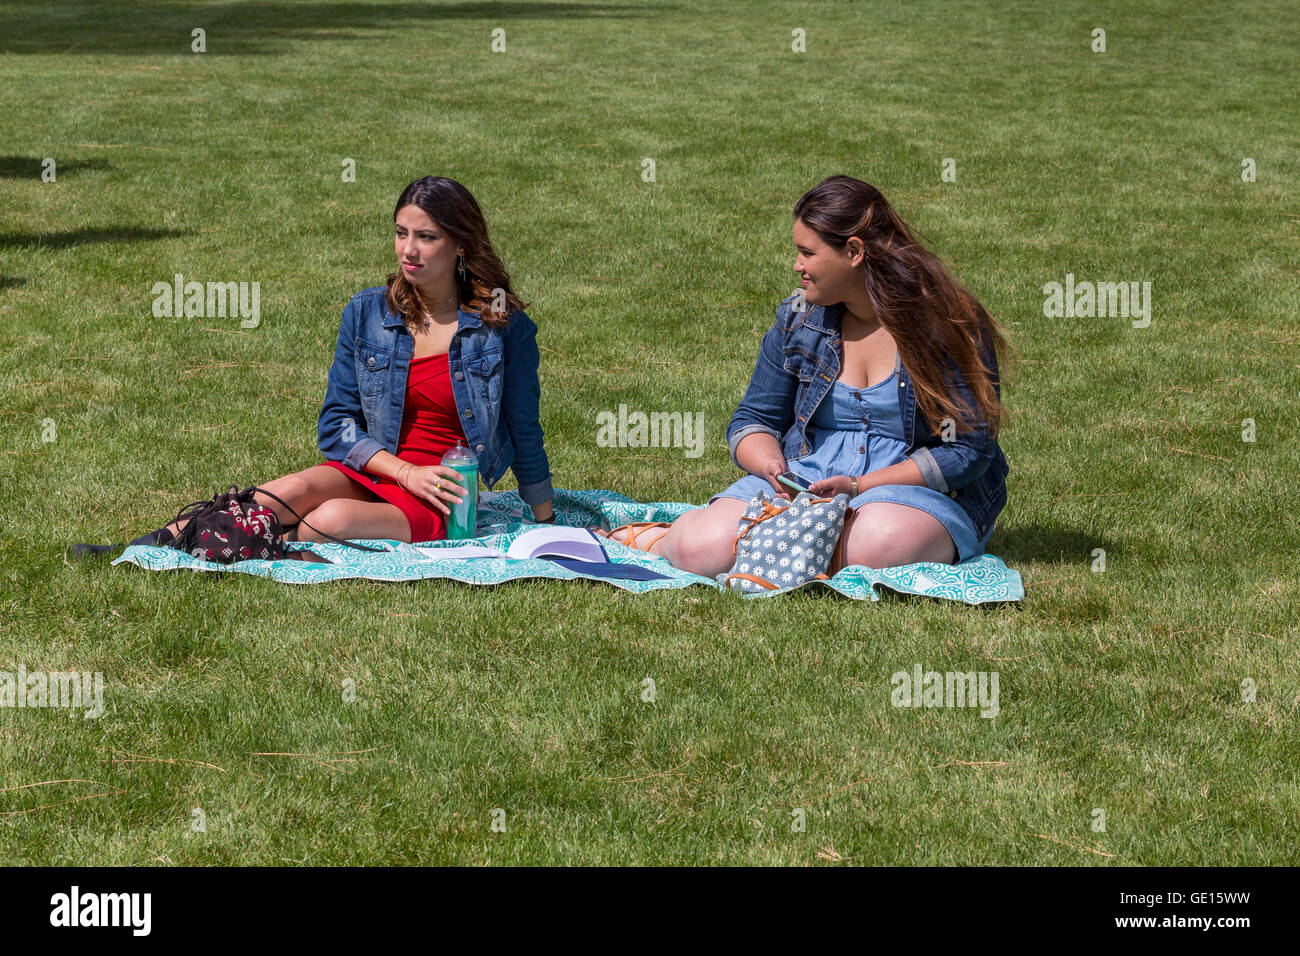 two young women, young women, female students, students, Sonoma State University, city, Rohnert Park, Sonoma County, California Stock Photo